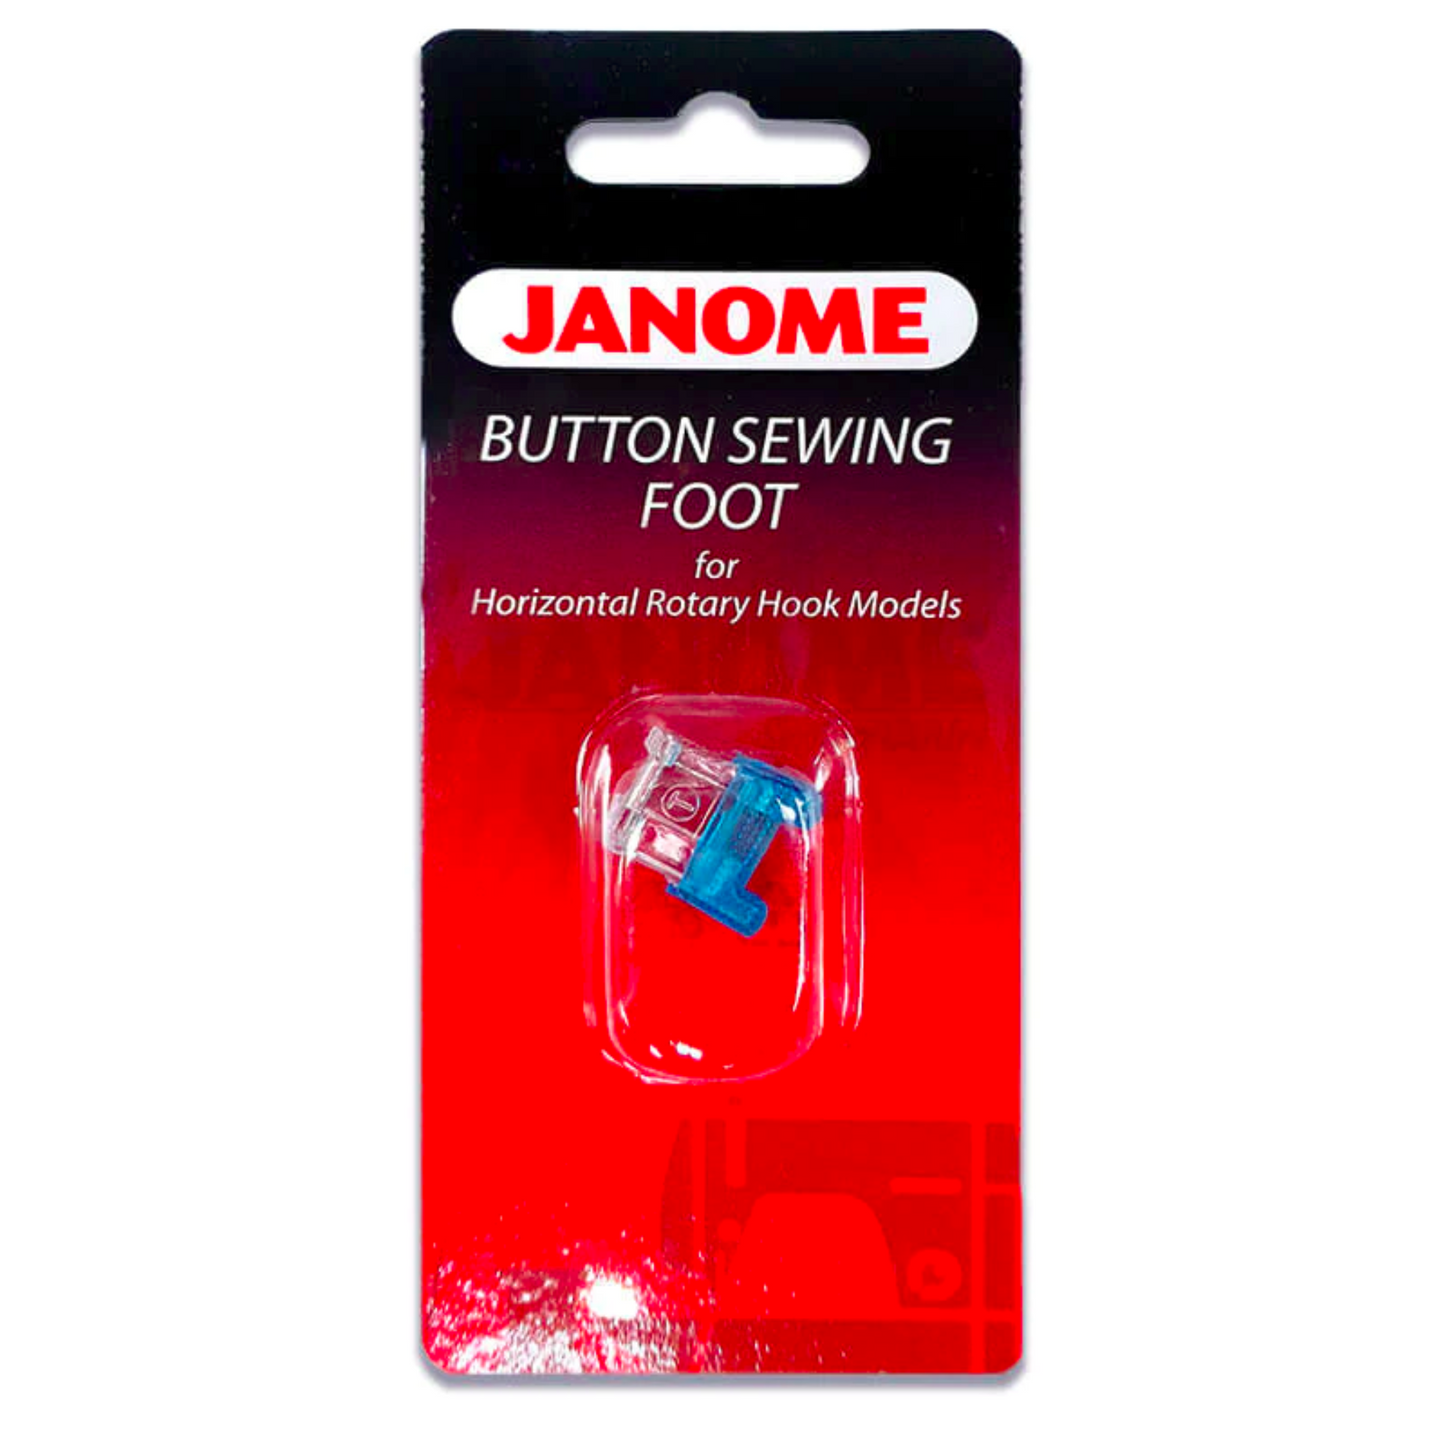 Janome button sewing foot - Sewing accessory - Multi color - Packet